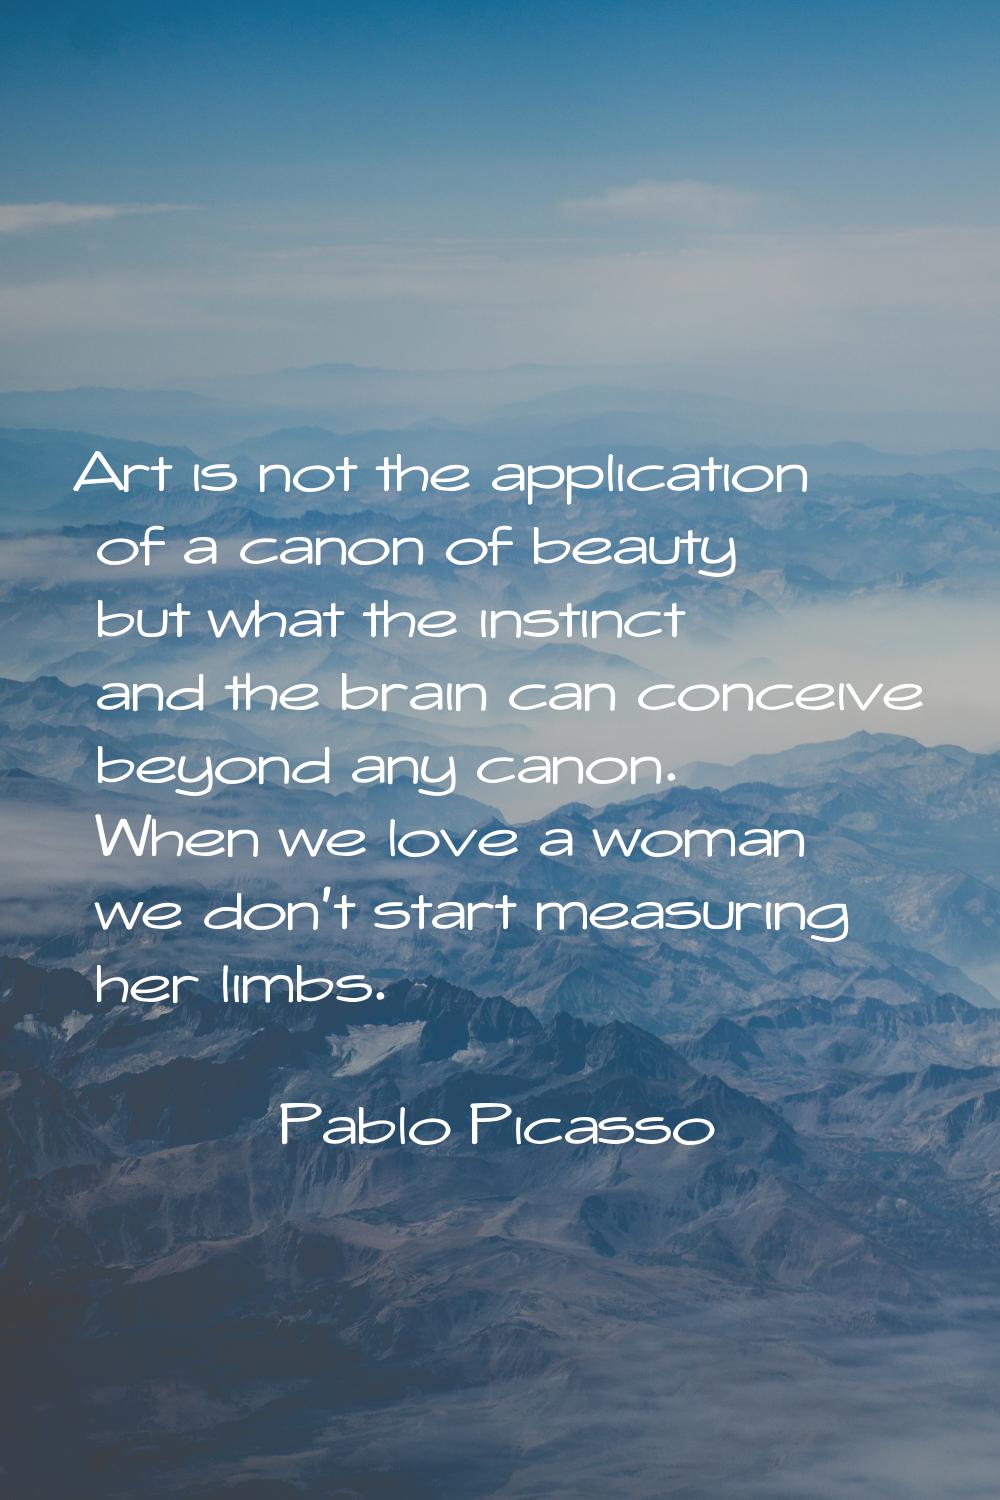 Art is not the application of a canon of beauty but what the instinct and the brain can conceive be